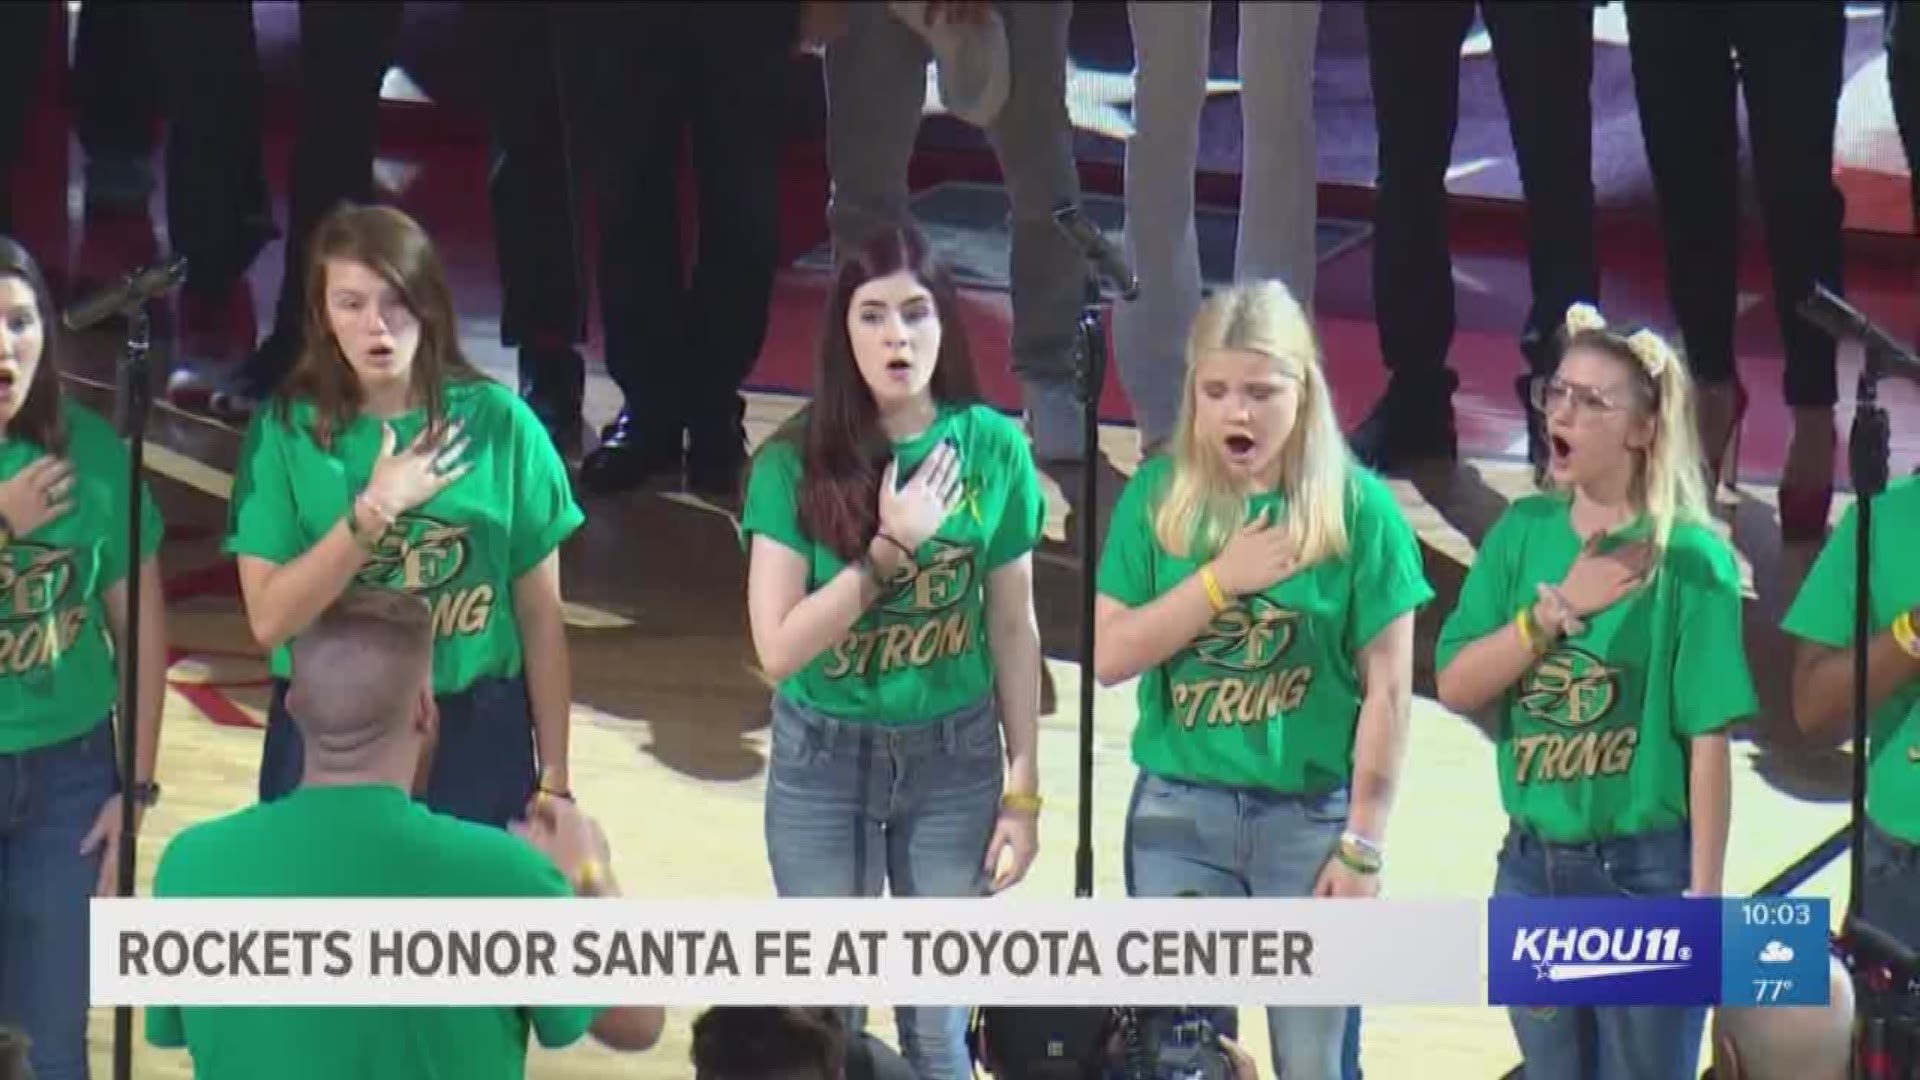 Santa Fe High School shooting victims were honored before Game 5 of the Western Conference Finals at the Toyota Center.